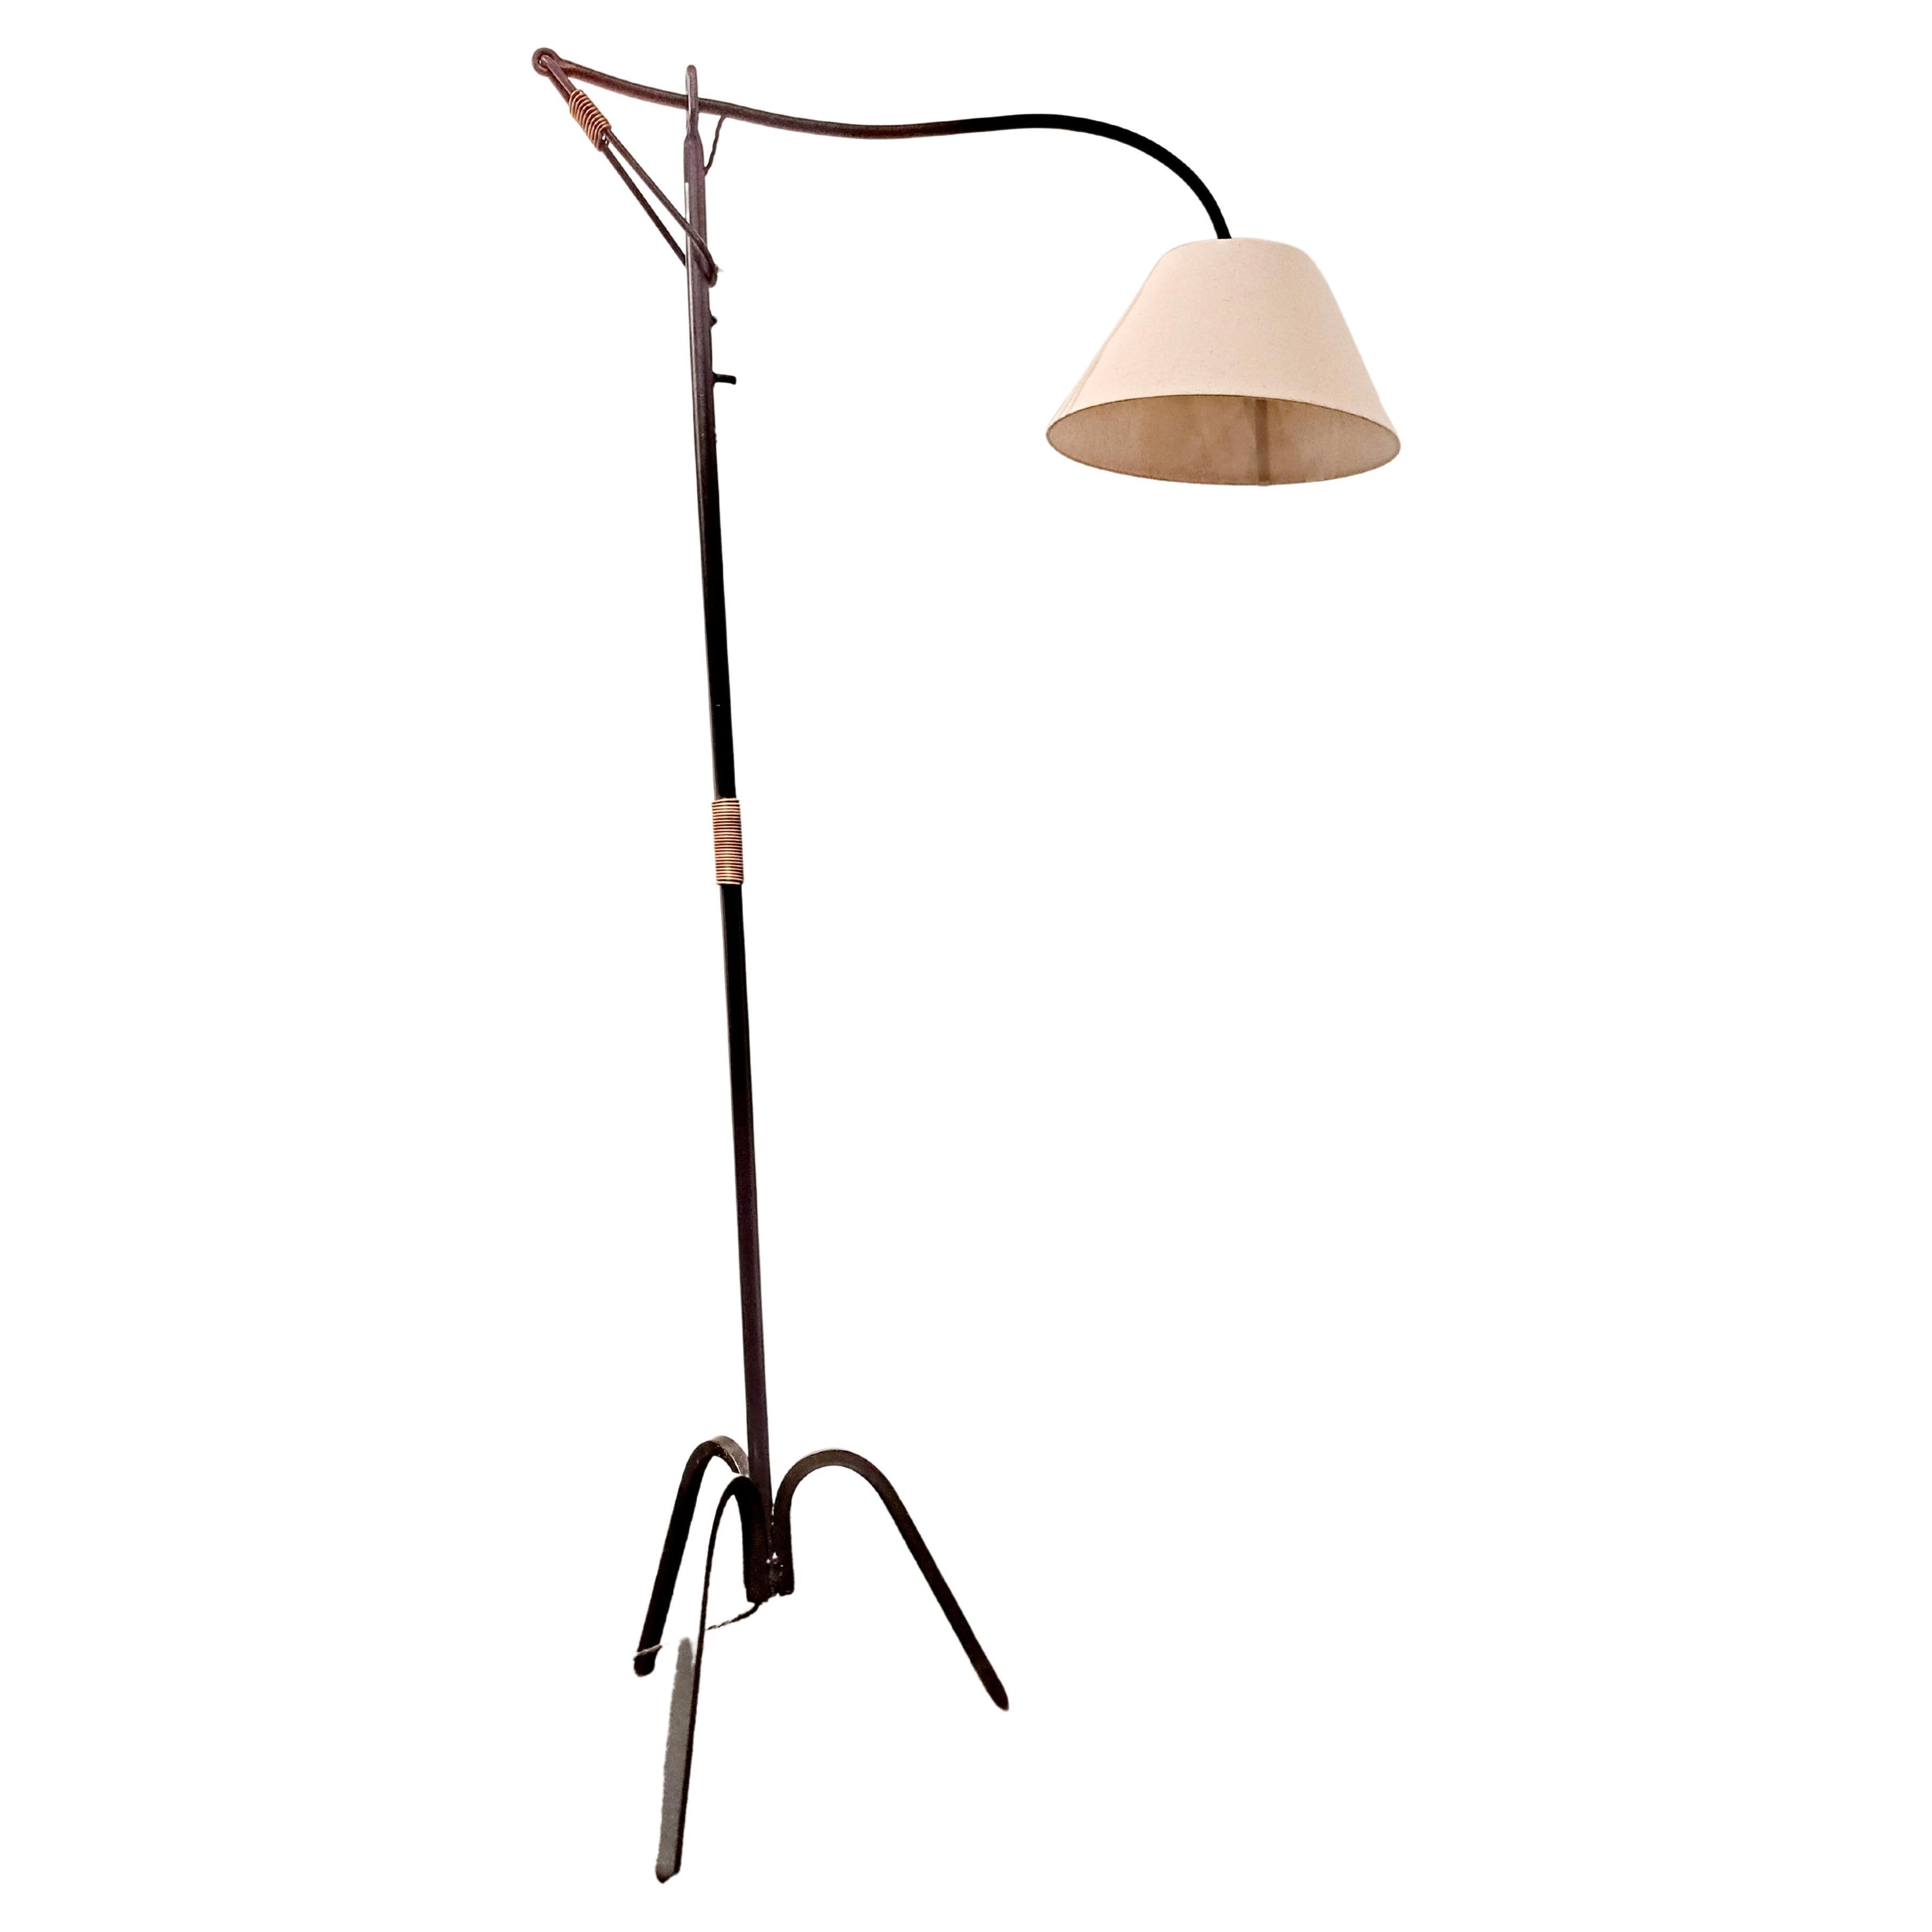 Mid-Century Modern vintage adjustable floor lamp from black iron and brass details attributed to Jacques Adnet 1950s France. Solid heavy iron with a lovely brass-wrapped accent around the stem. Newly rewired standards. In good condition with patina